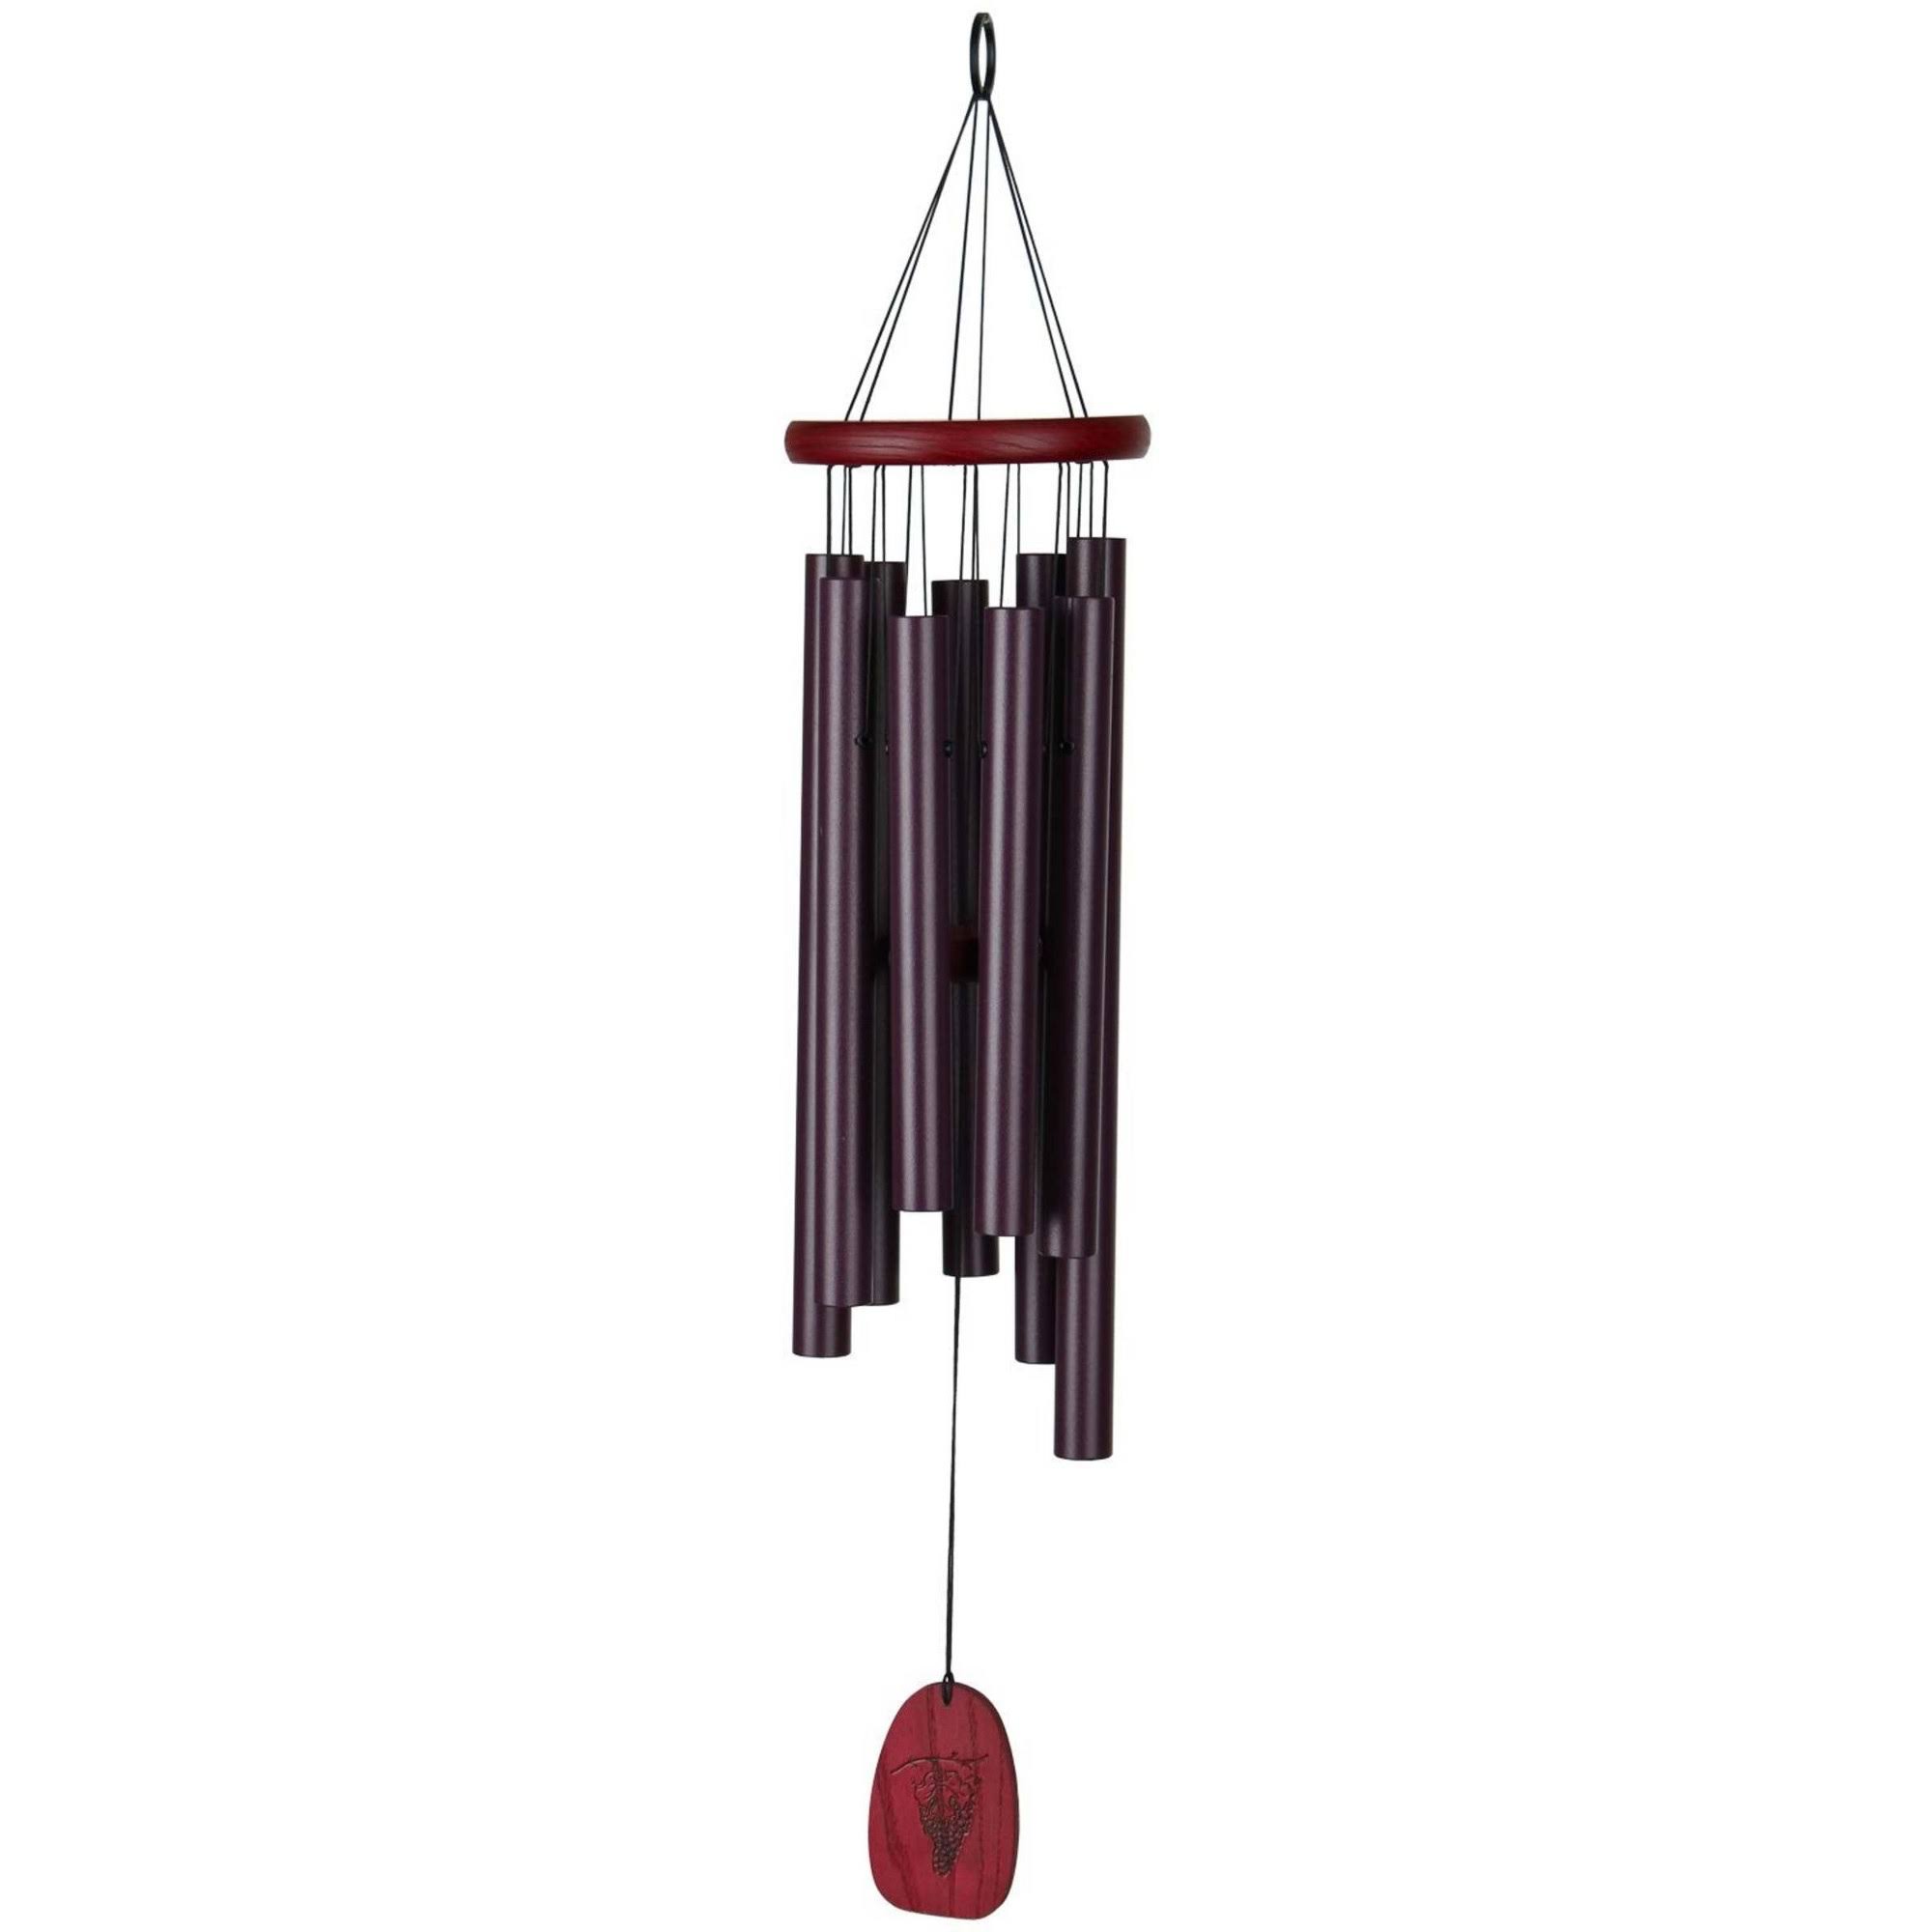 Woodstock Tuscany Wind Chime - Brown, 27"